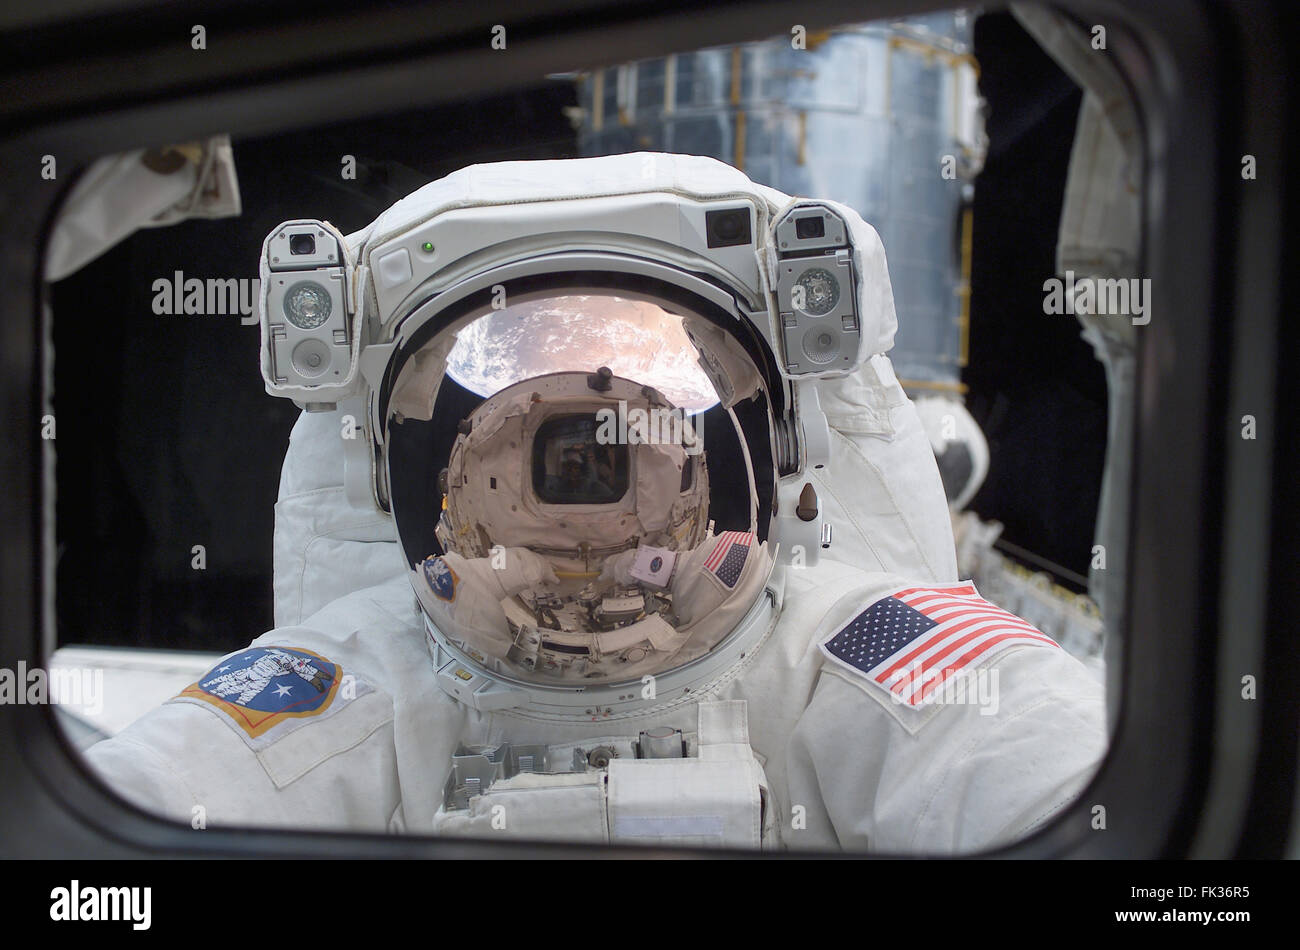 NASA astronaut John Grunsfeld peers into the crew cabin of the Space Shuttle Columbia from outer space during the first STS-109 extravehicular activity March 4, 2002 in Earth Orbit. Grunsfeld's helmet visor, with the sunshield now in place, displays mirrored images of the Earth and the Space Shuttle Columbia's aft cabin. Stock Photo